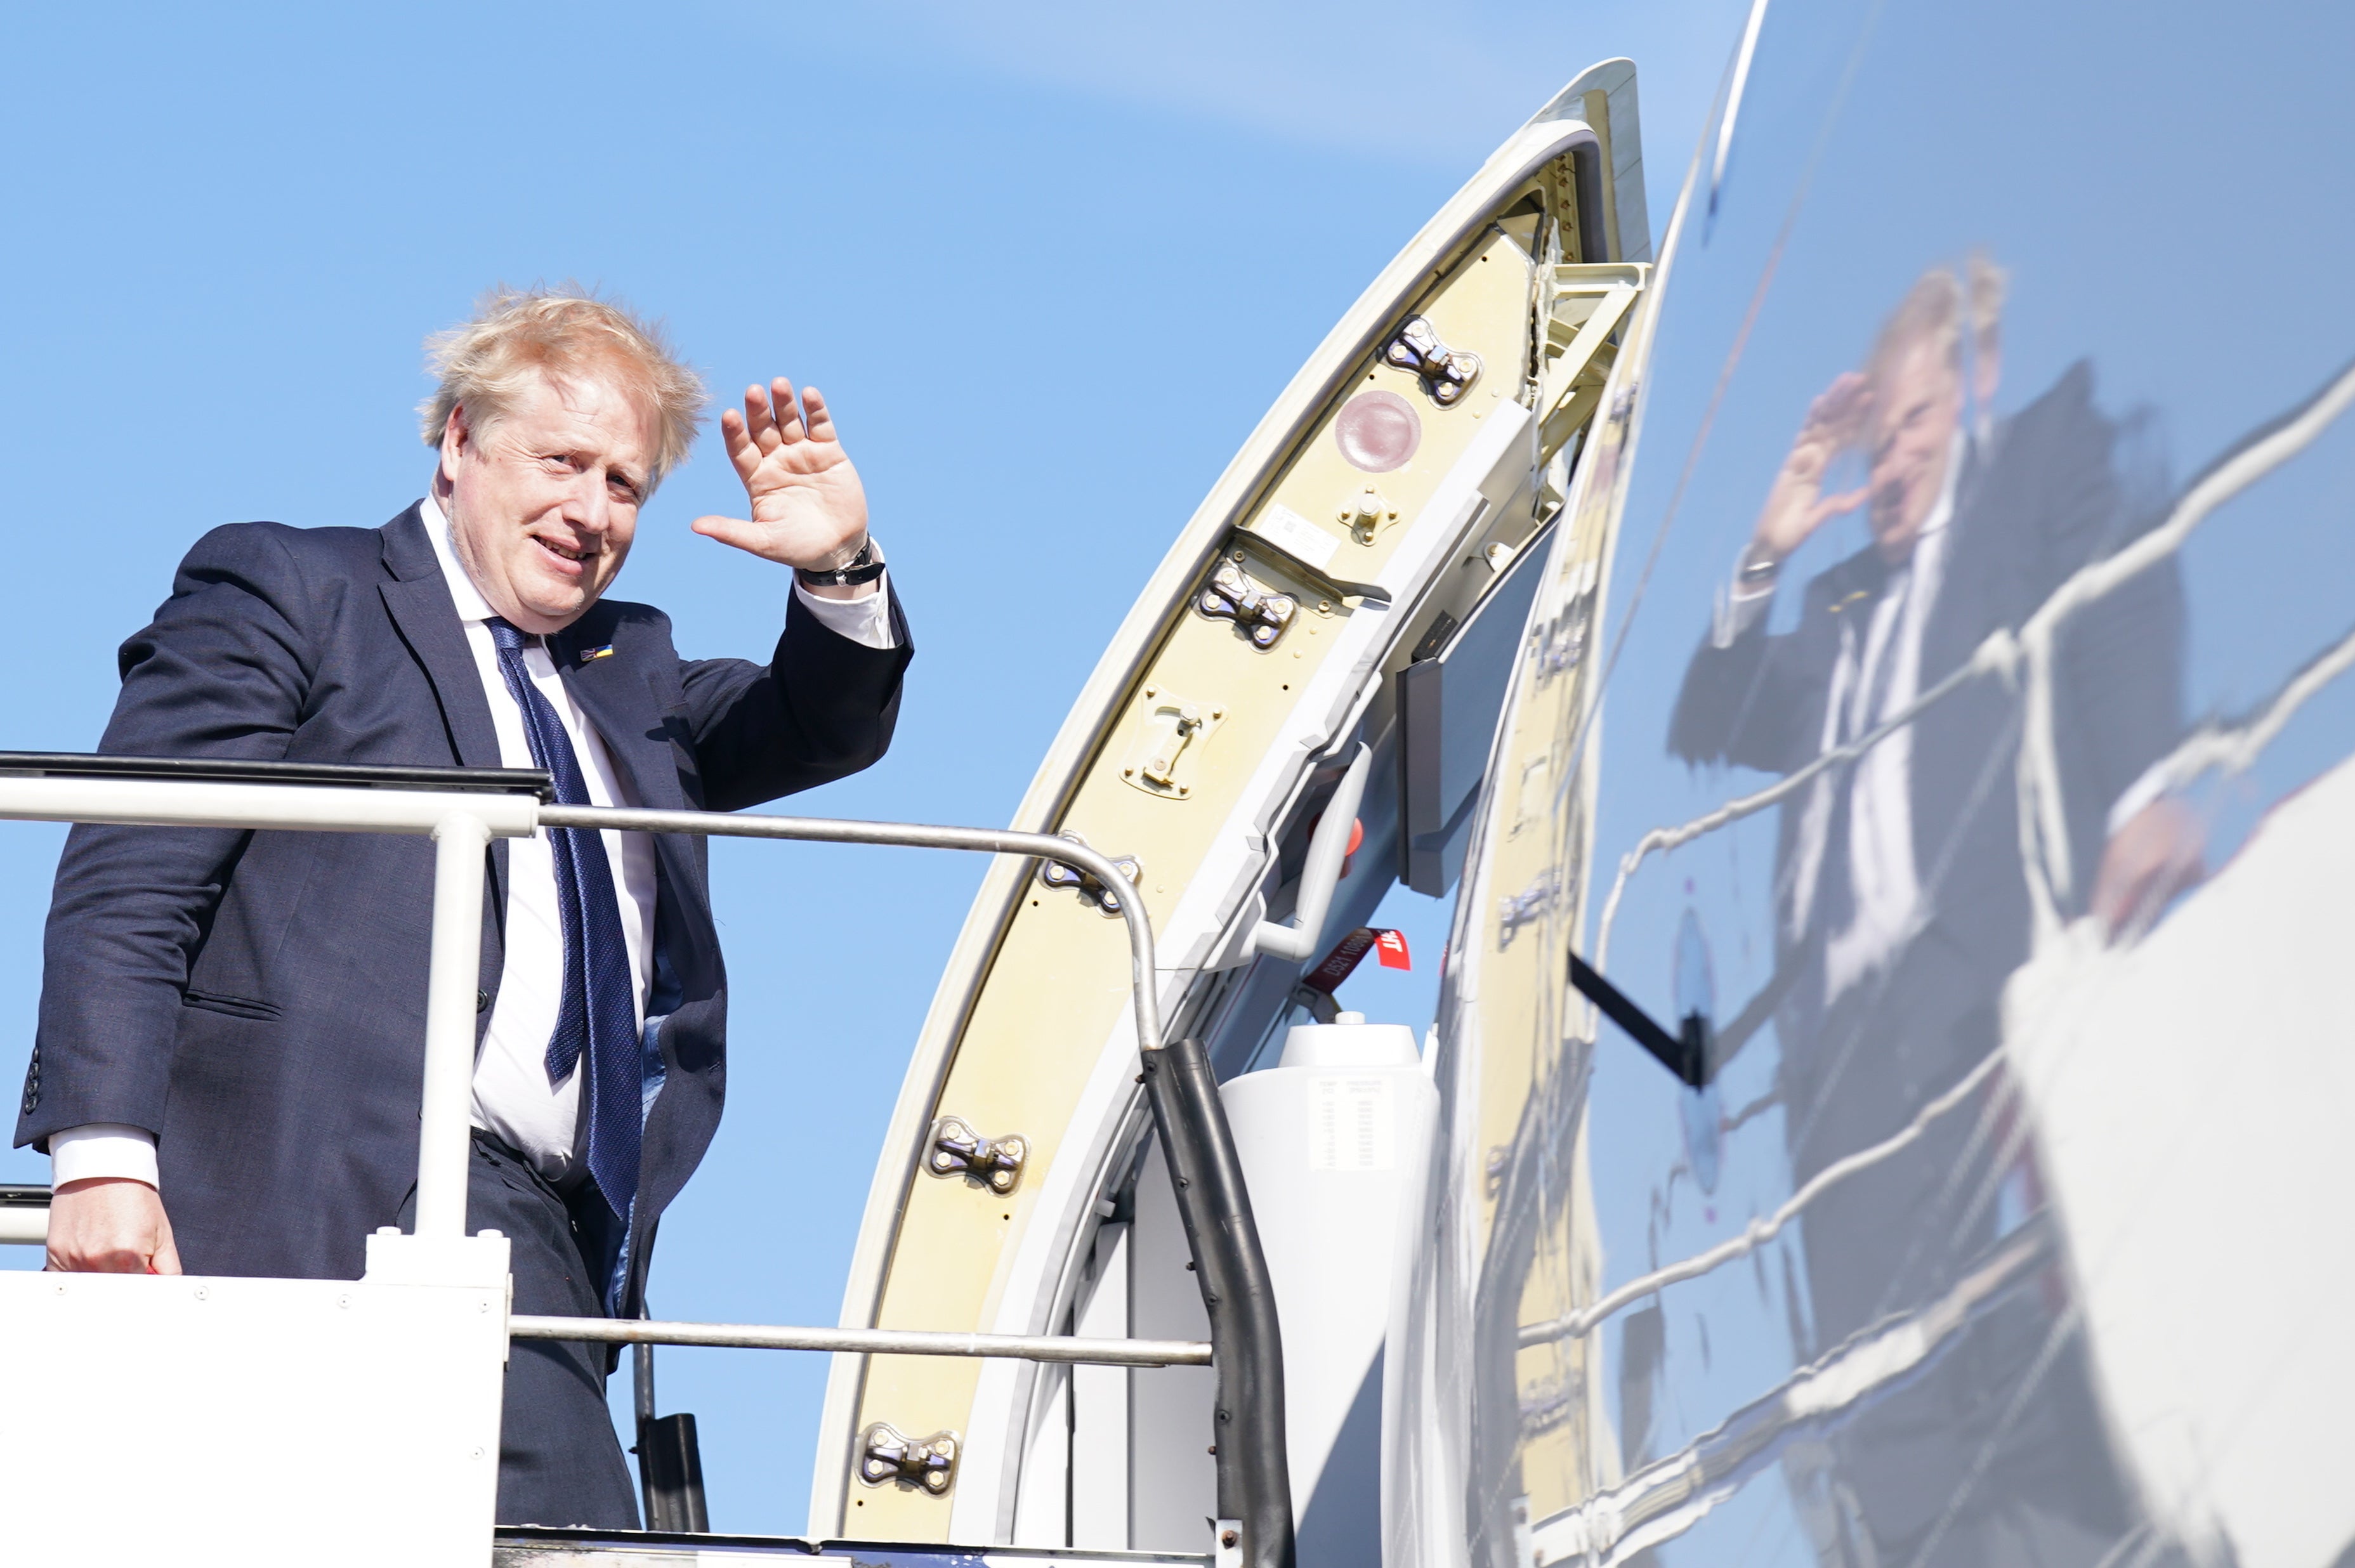 Boris Johnson is currently on an official trip to India